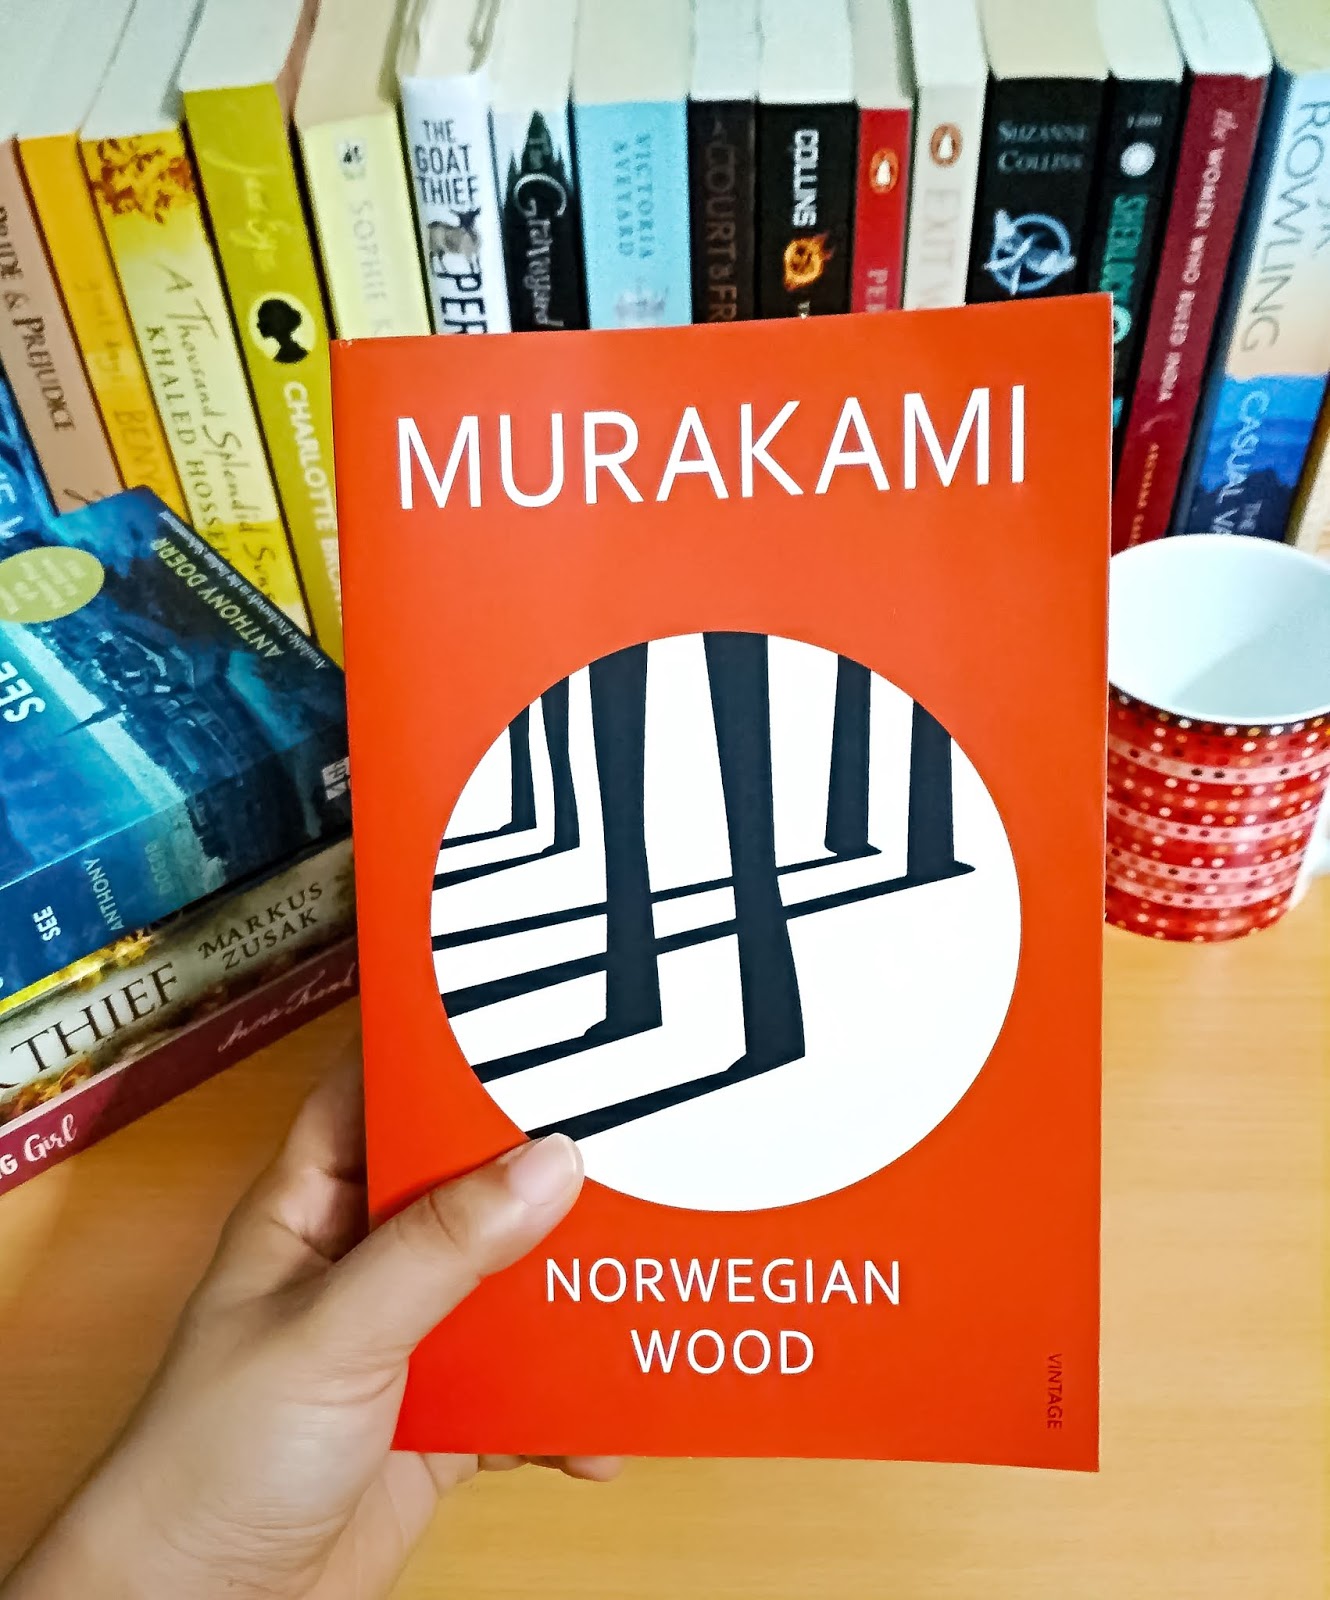 norwegian wood book review new york times